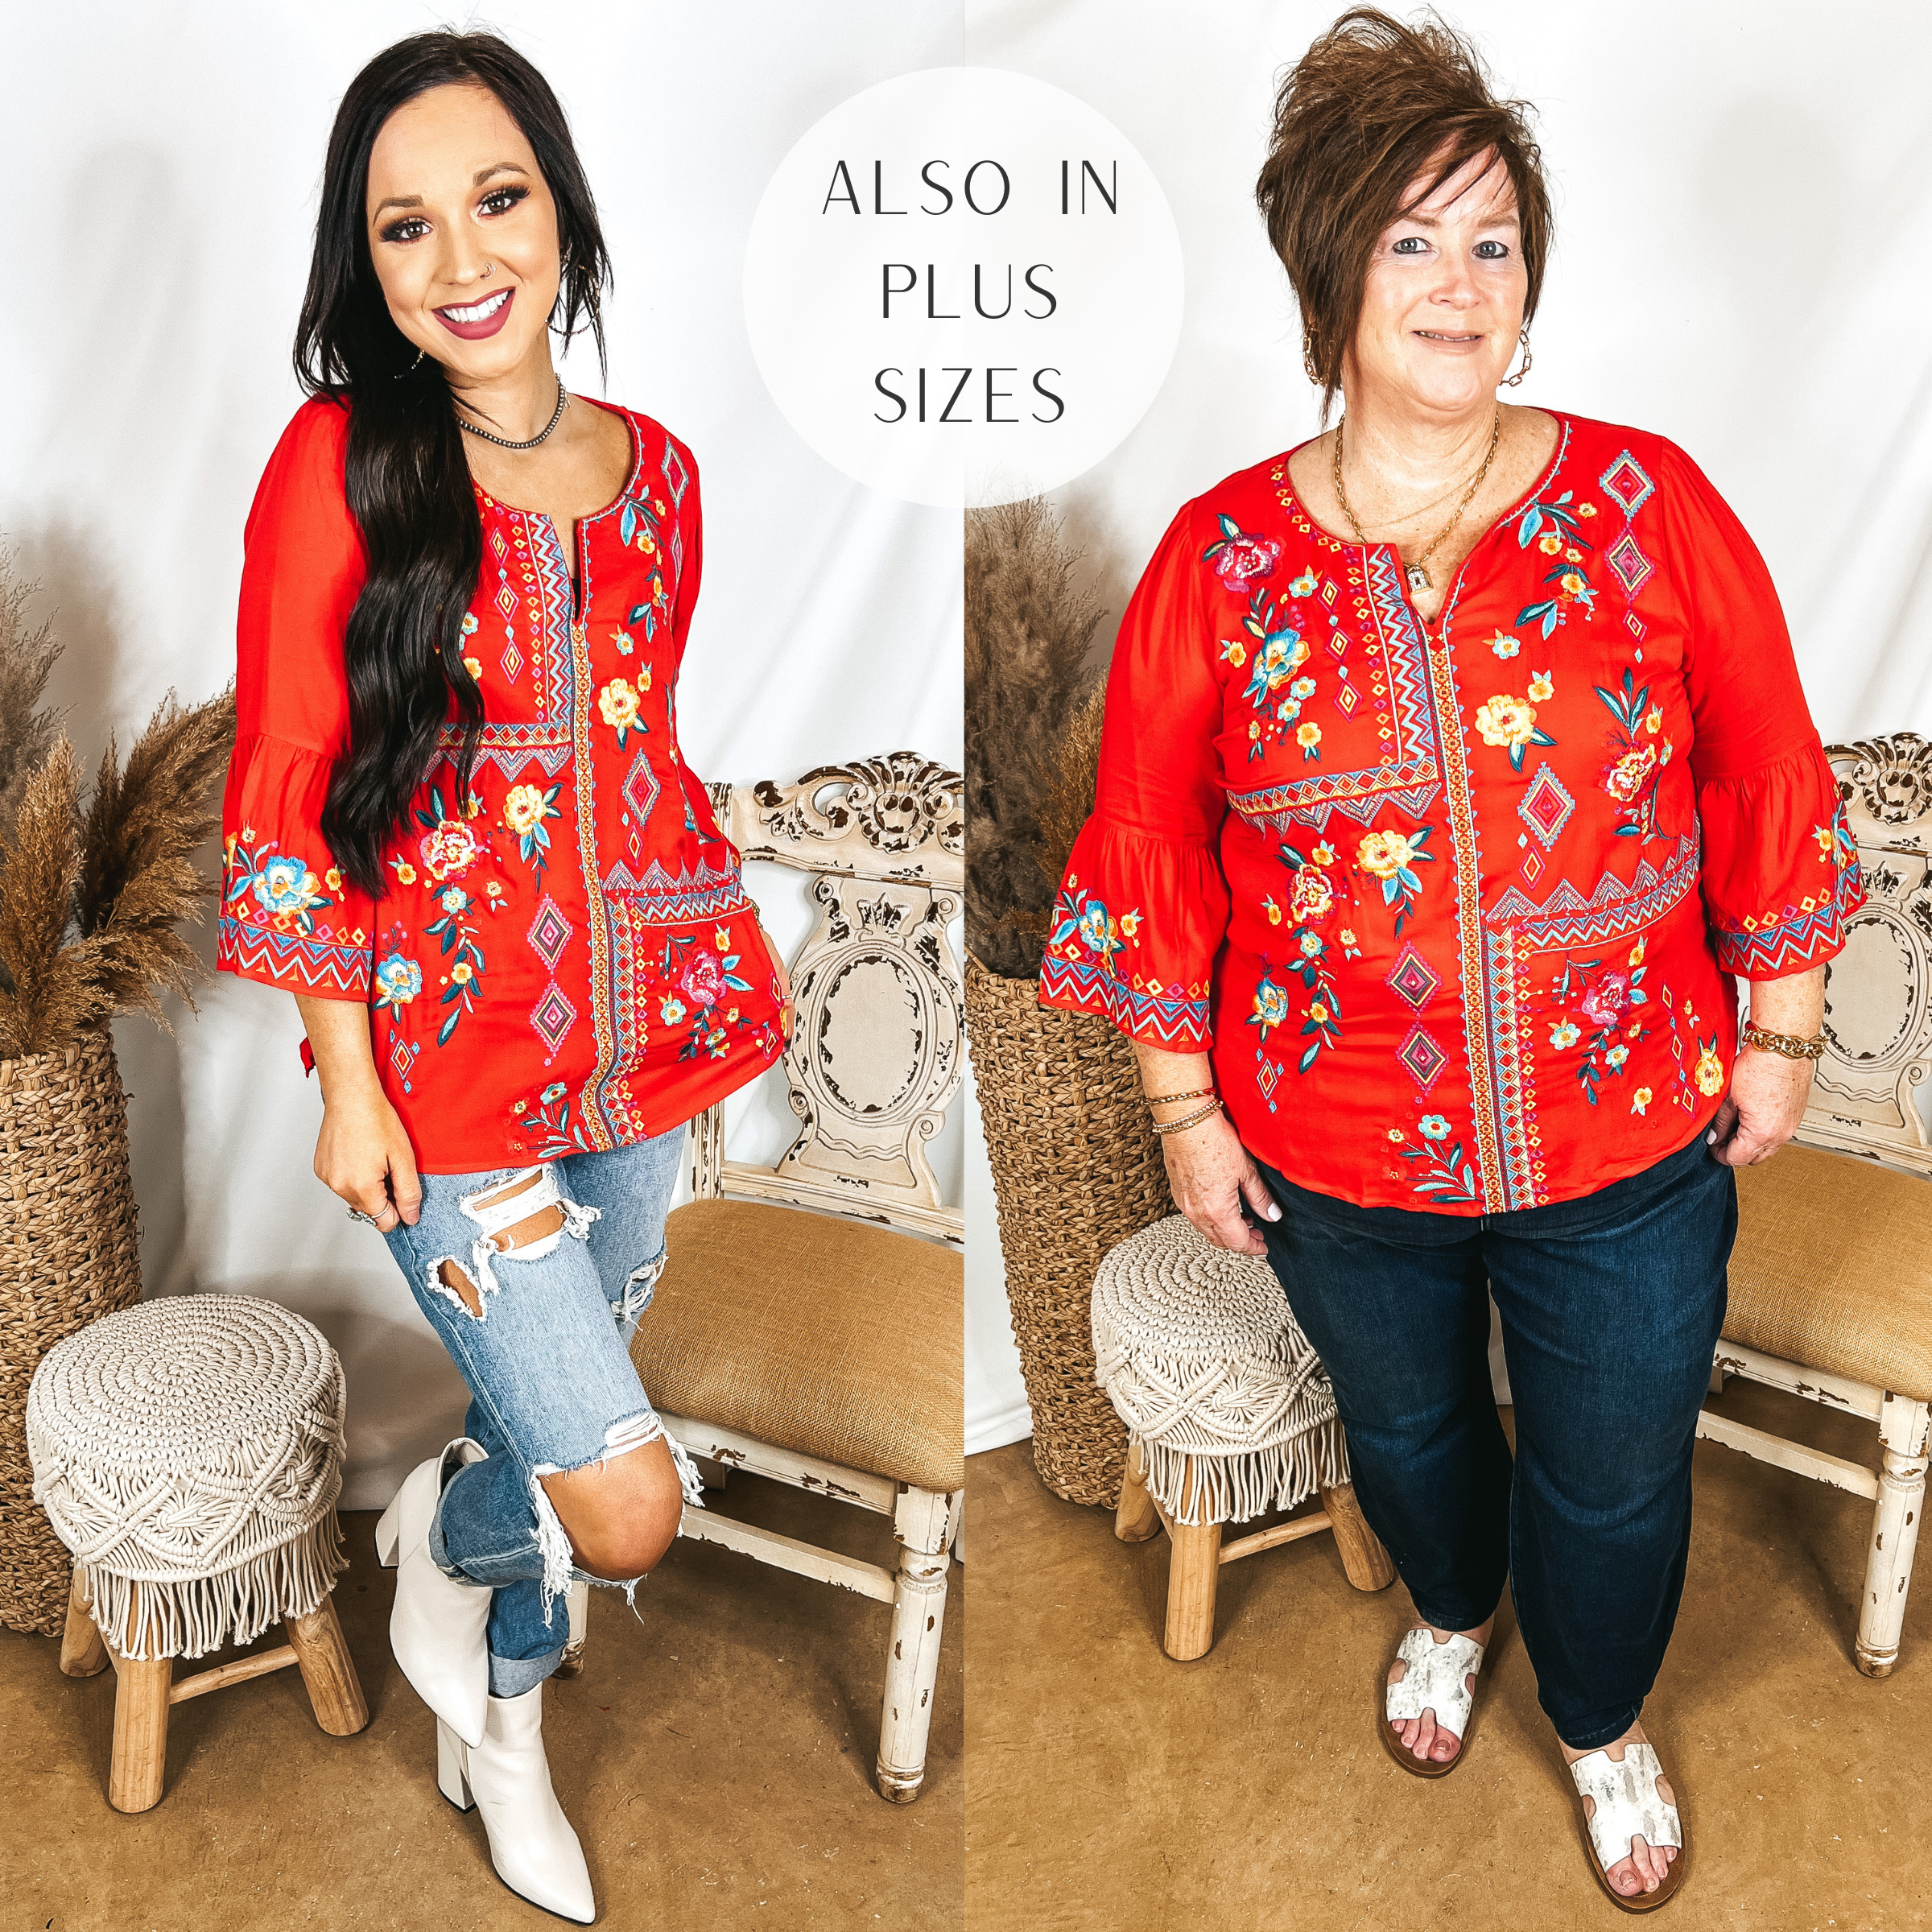 Models are wearing a red top with 3/4 sleeves and embroidery on the front. Size small model has it paired with distressed jeans, white booties, and silver jewelry. Plus size model has it paired with dark wash skinny jeans, white sandals, and gold jewelry.